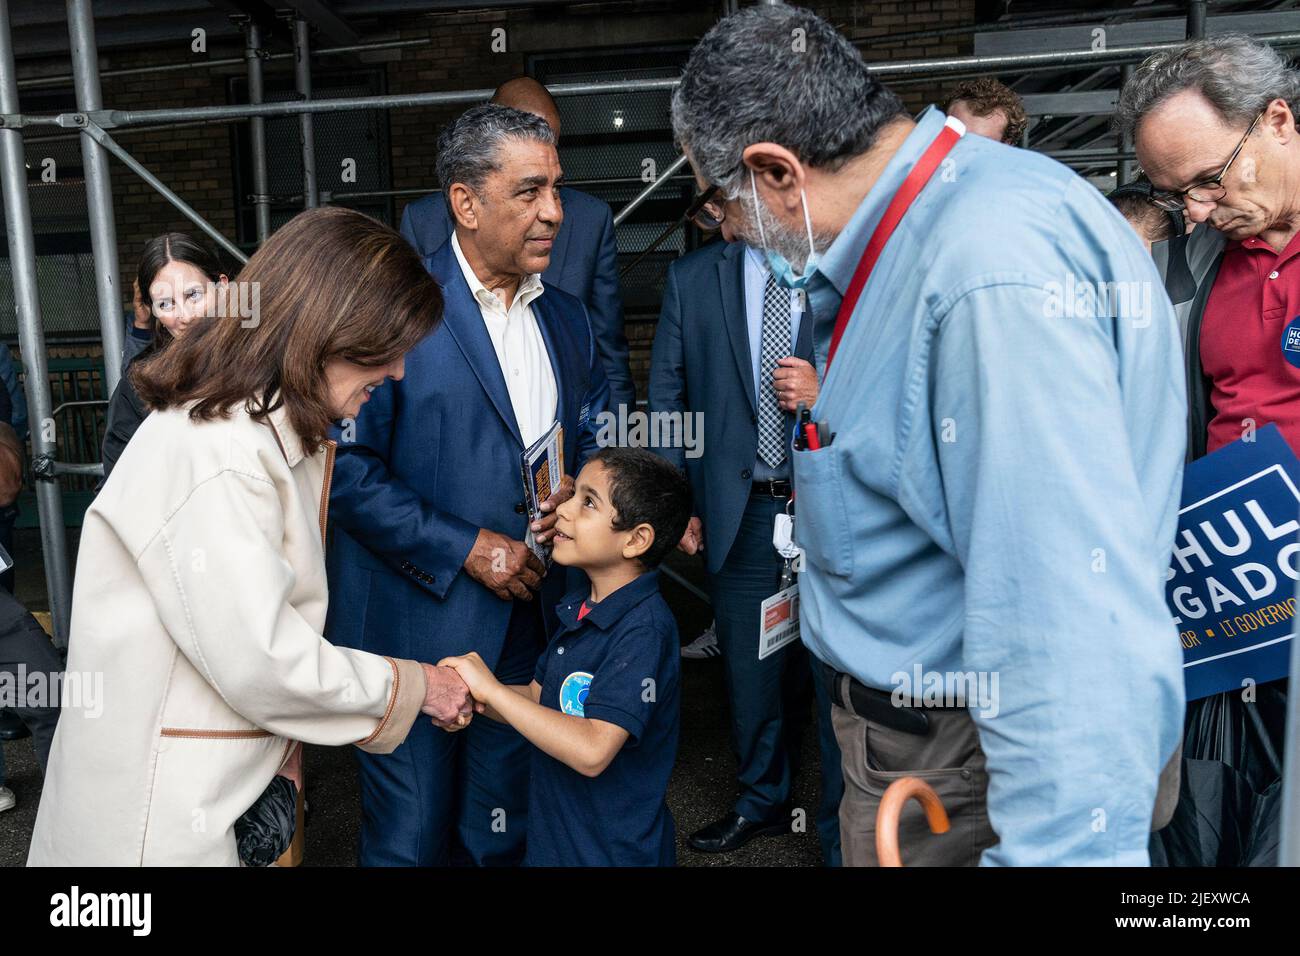 New York, United States. 27th June, 2022. Governor Kathy Hochul greets  young boy during campaign stop alone with Lieutenant Governor Antonio  Delgado in Washington Heights. Antonio Delgado is running for Lieutenant  Governor